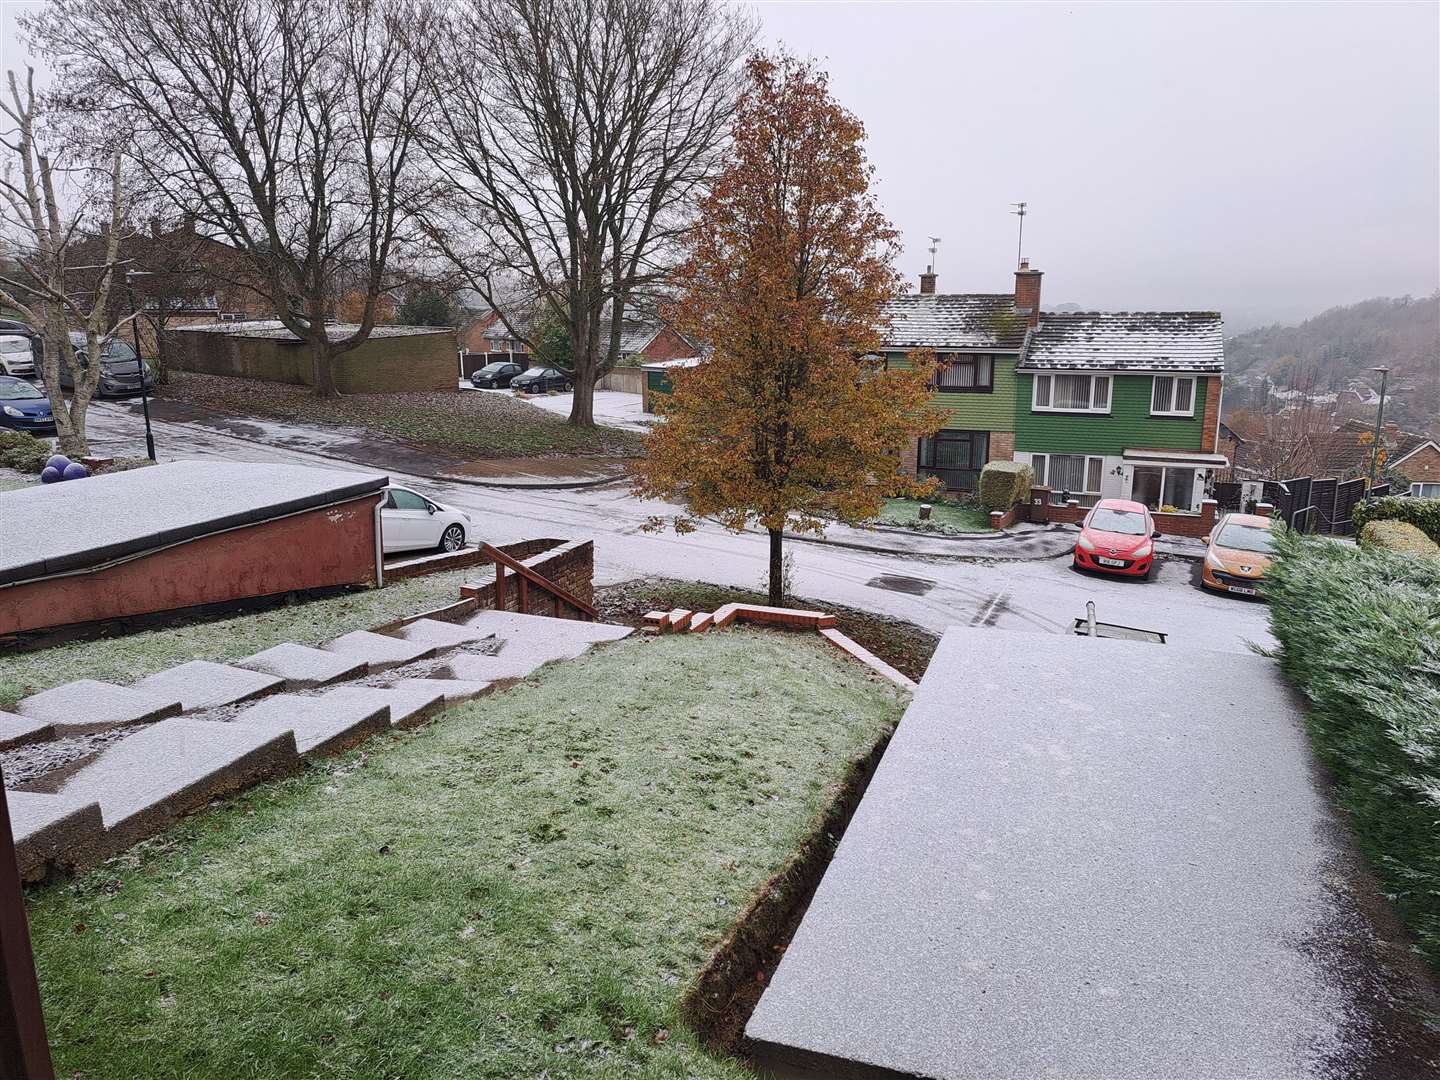 A dusting of the white stuff in Walderslade, near Chatham